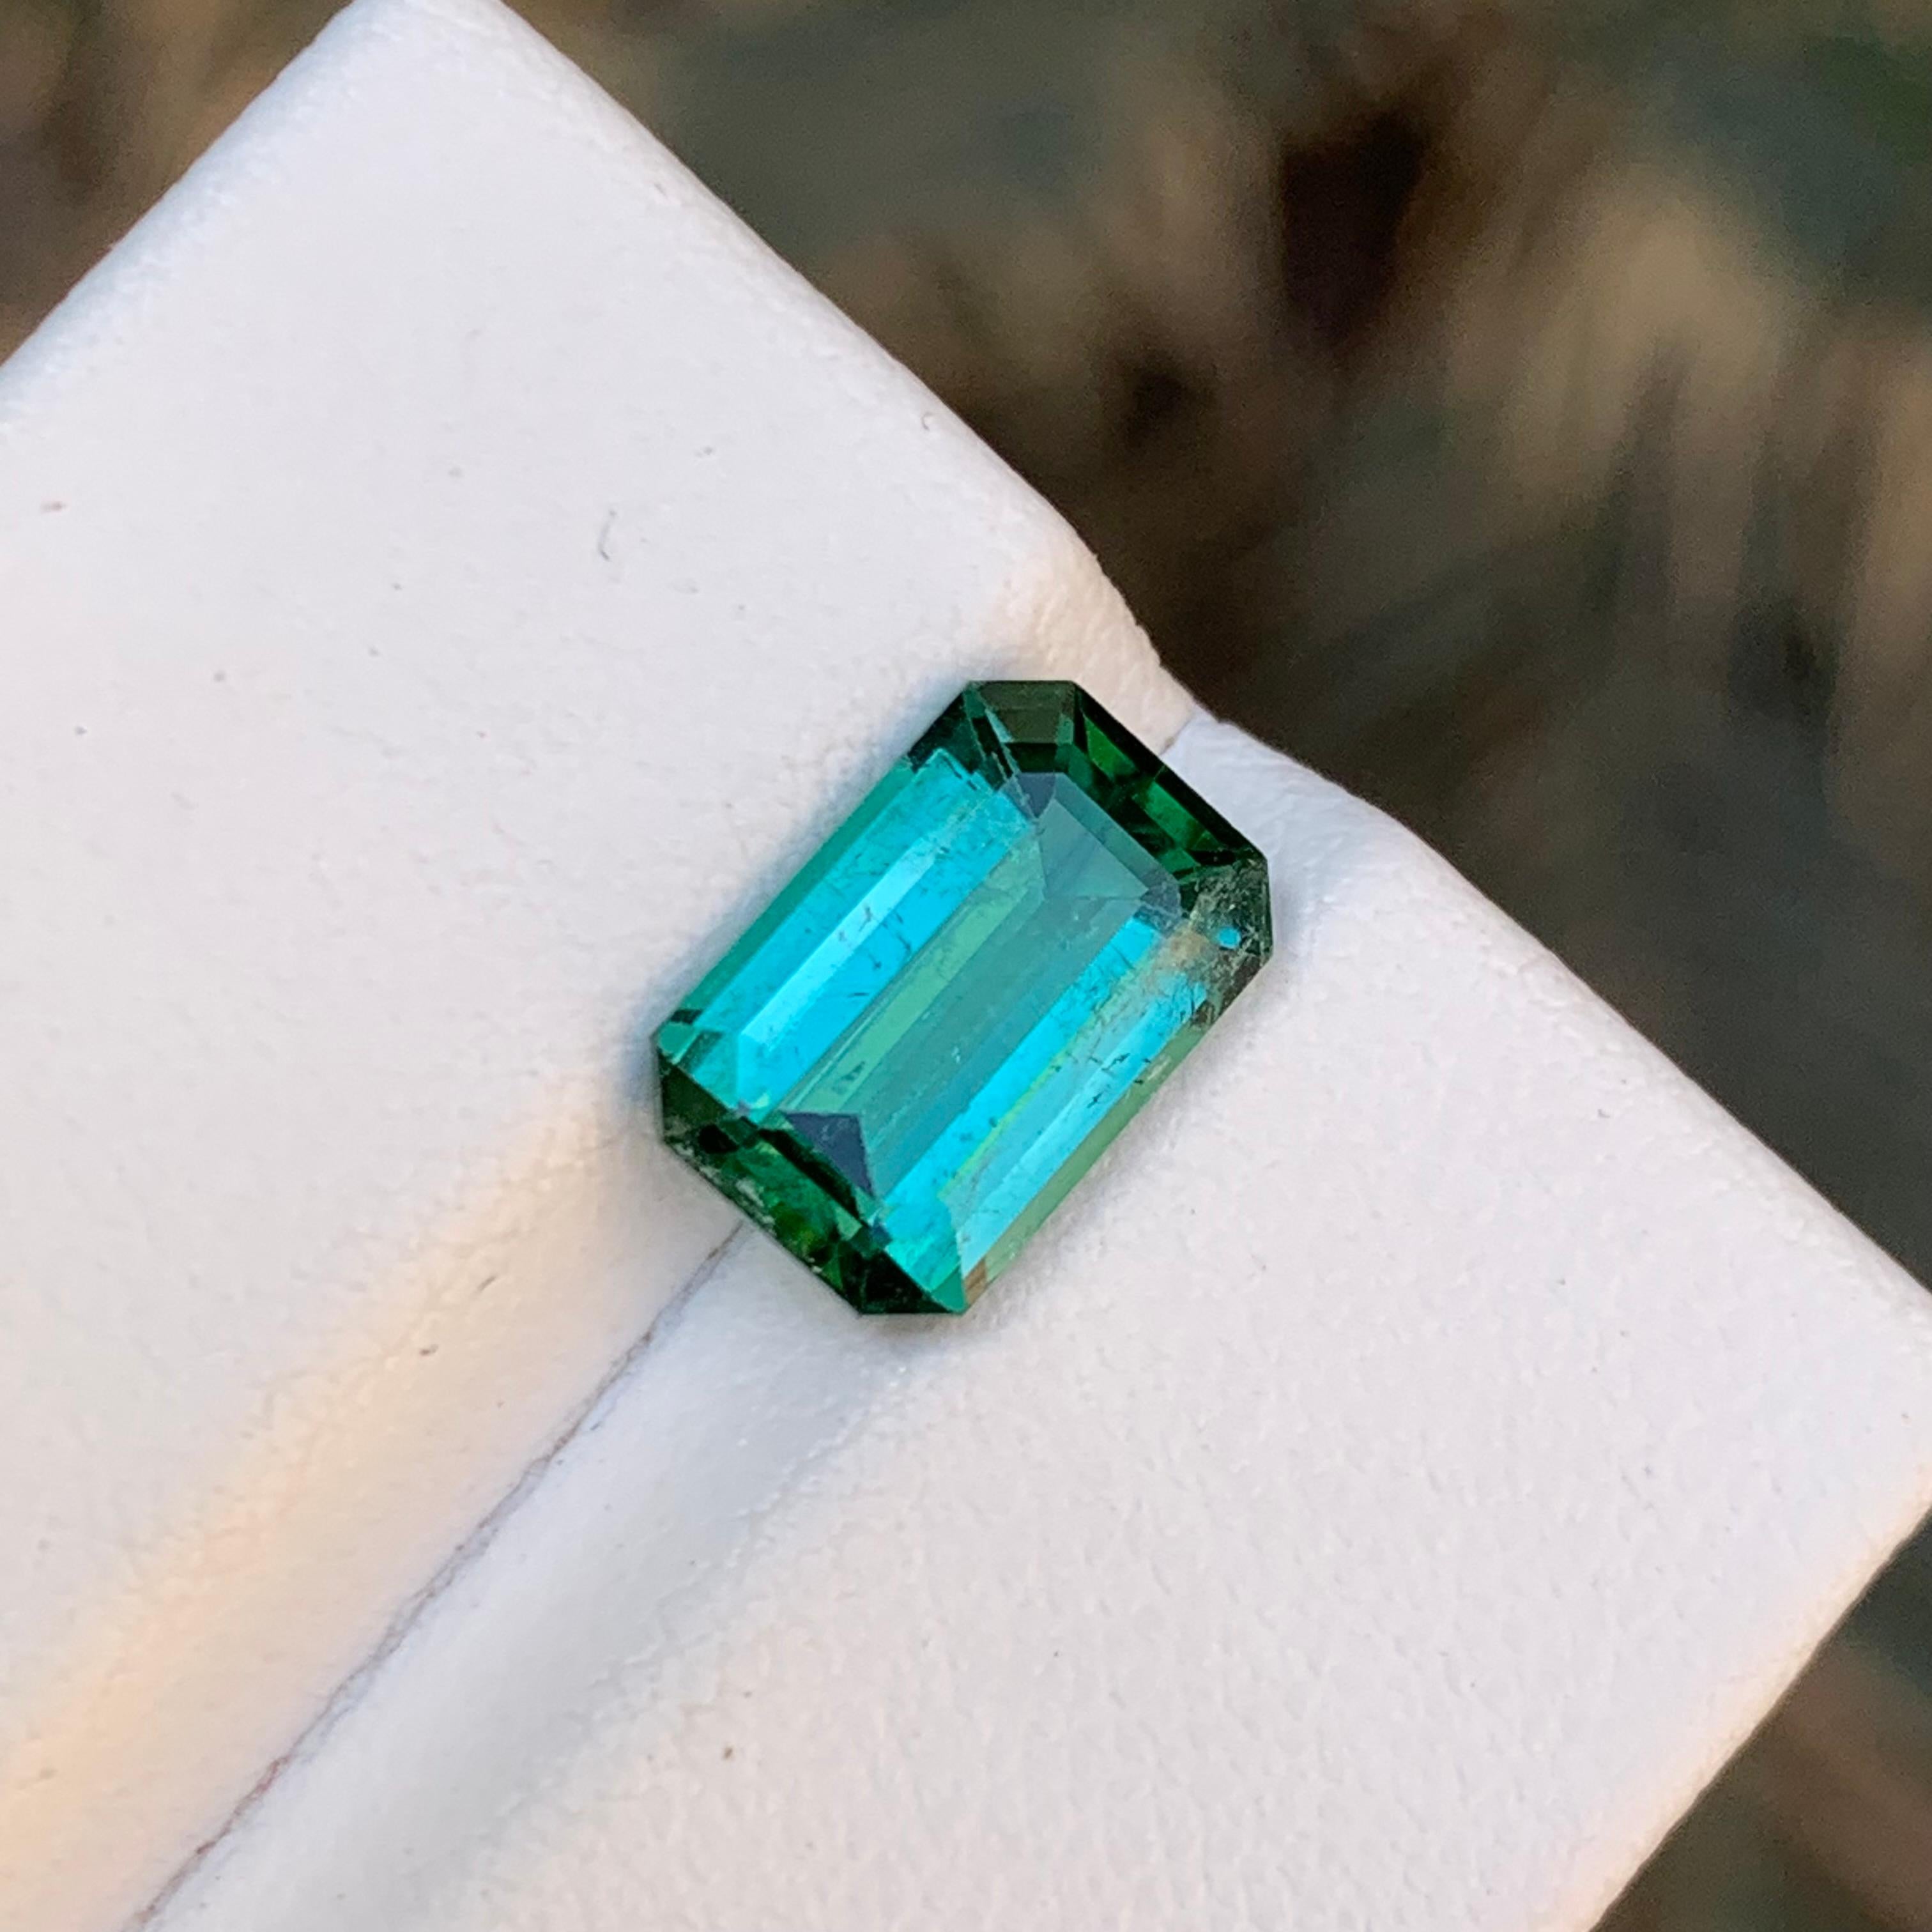 GEMSTONE TYPE: Tourmaline
PIECE(S): 1
WEIGHT: 2.70 Carats
SHAPE: Emerald
SIZE (MM): 10.17 x 6.76 x 4.47
COLOR: Bluish Green
CLARITY: Slightly Included 
TREATMENT: None
ORIGIN: Afghanistan
CERTIFICATE: On demand

Indulge in the enchanting allure of